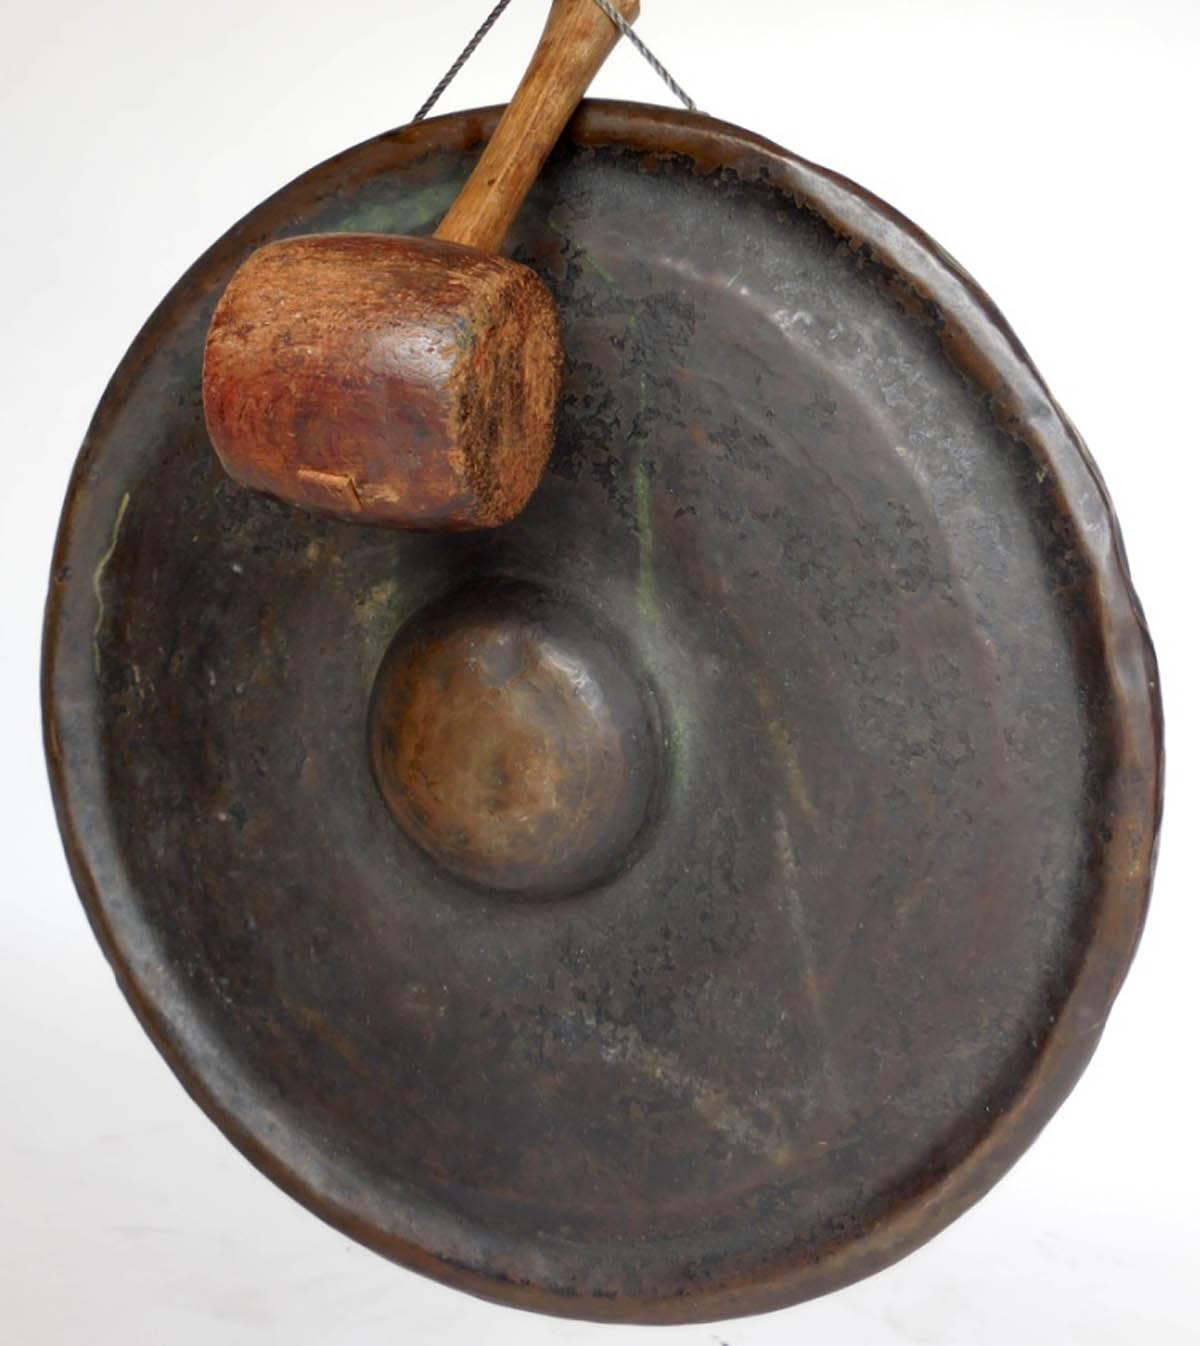 Unique 19th century Japanese petite bronze gong with scalloped edges and large wooden mallet/striker.
Great old natural patina on bronze and nice resonance!